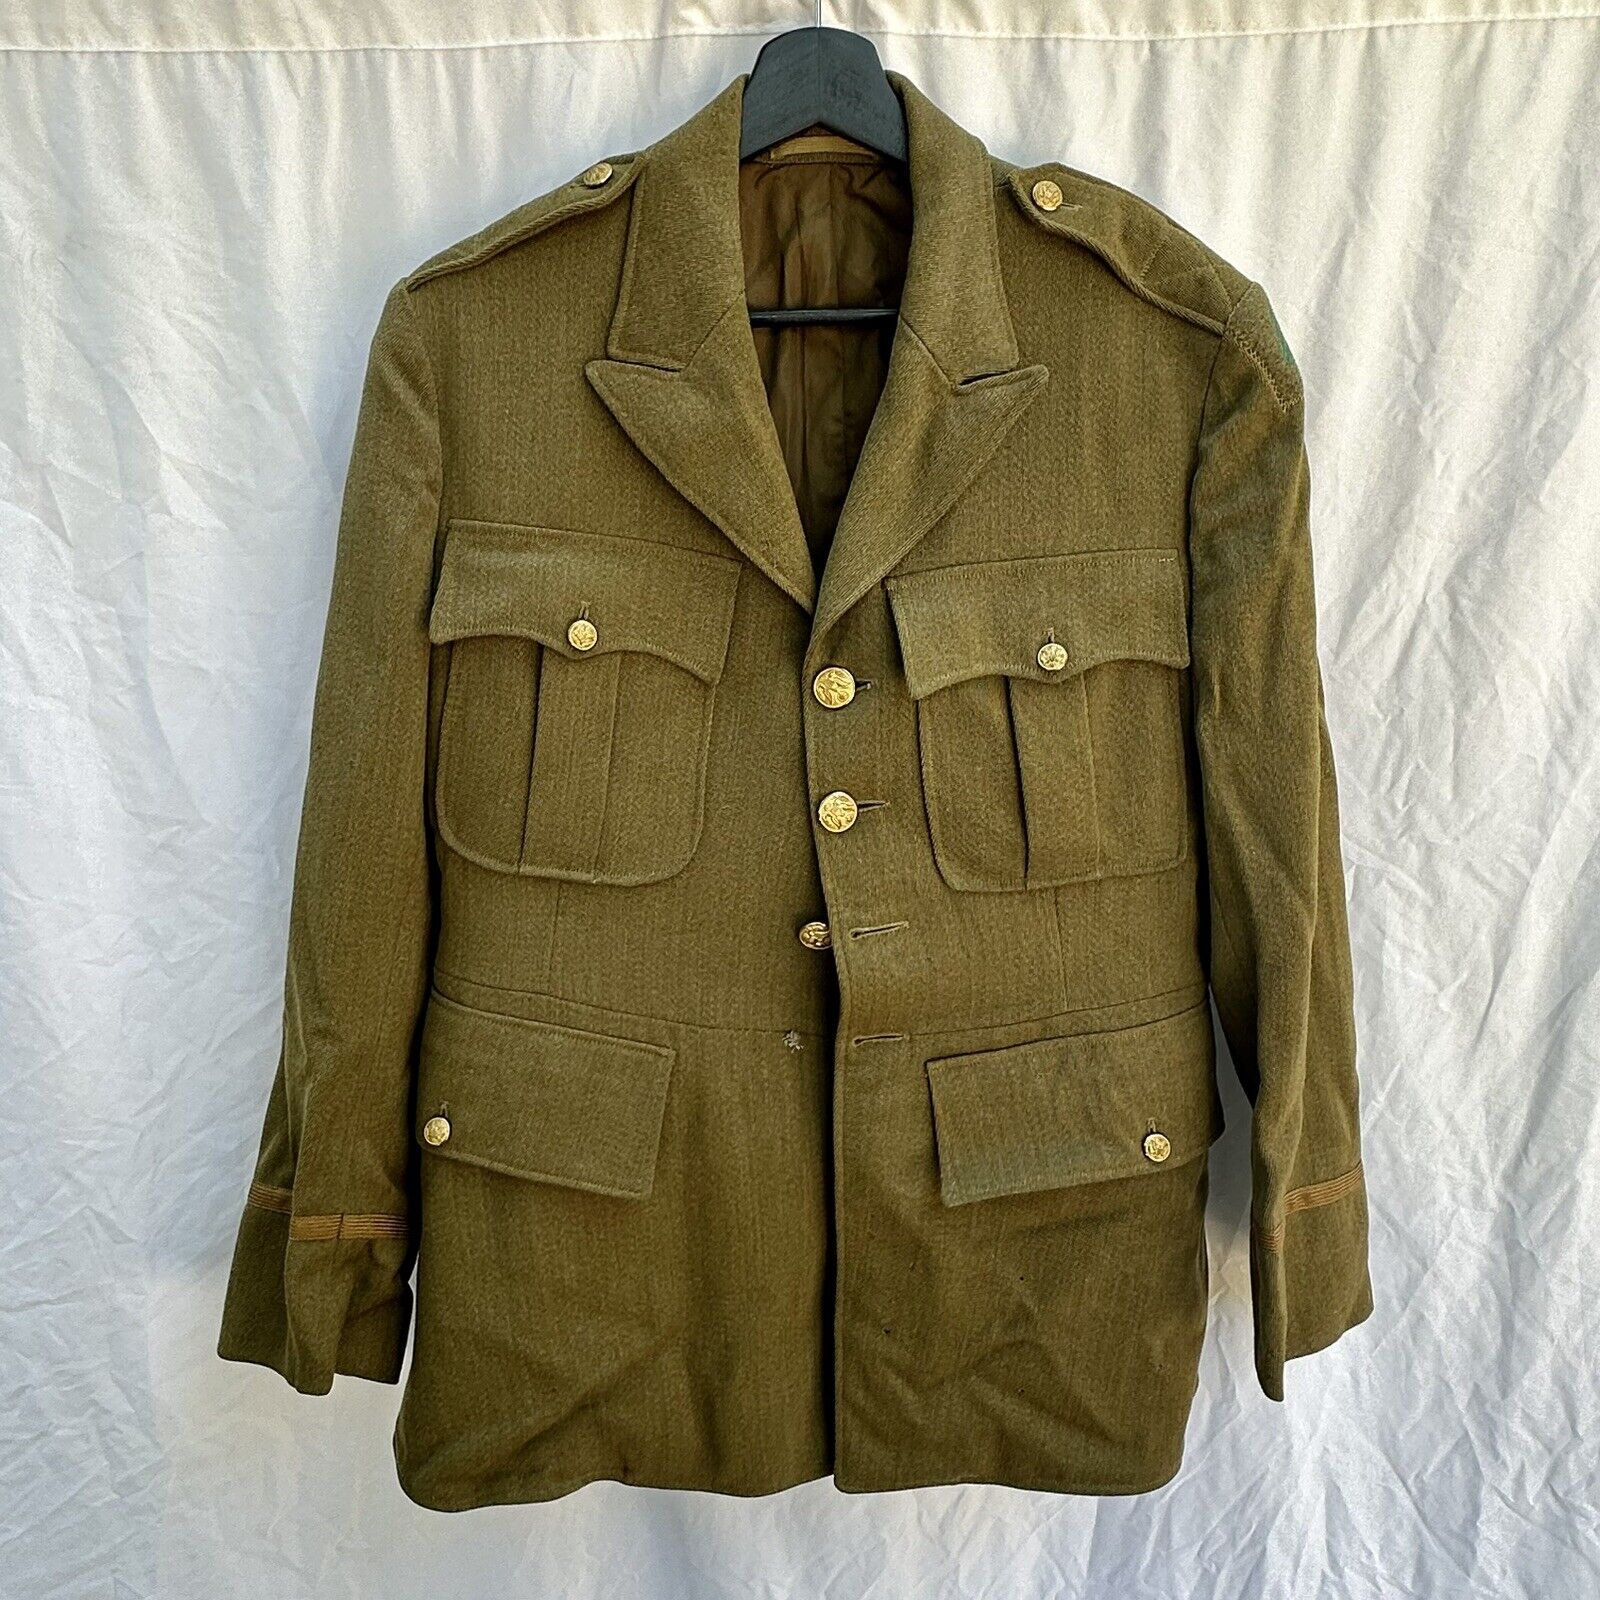 WW1-1920s US Army Patched 91st Inf Div Officers Tunic Jacket Tailored